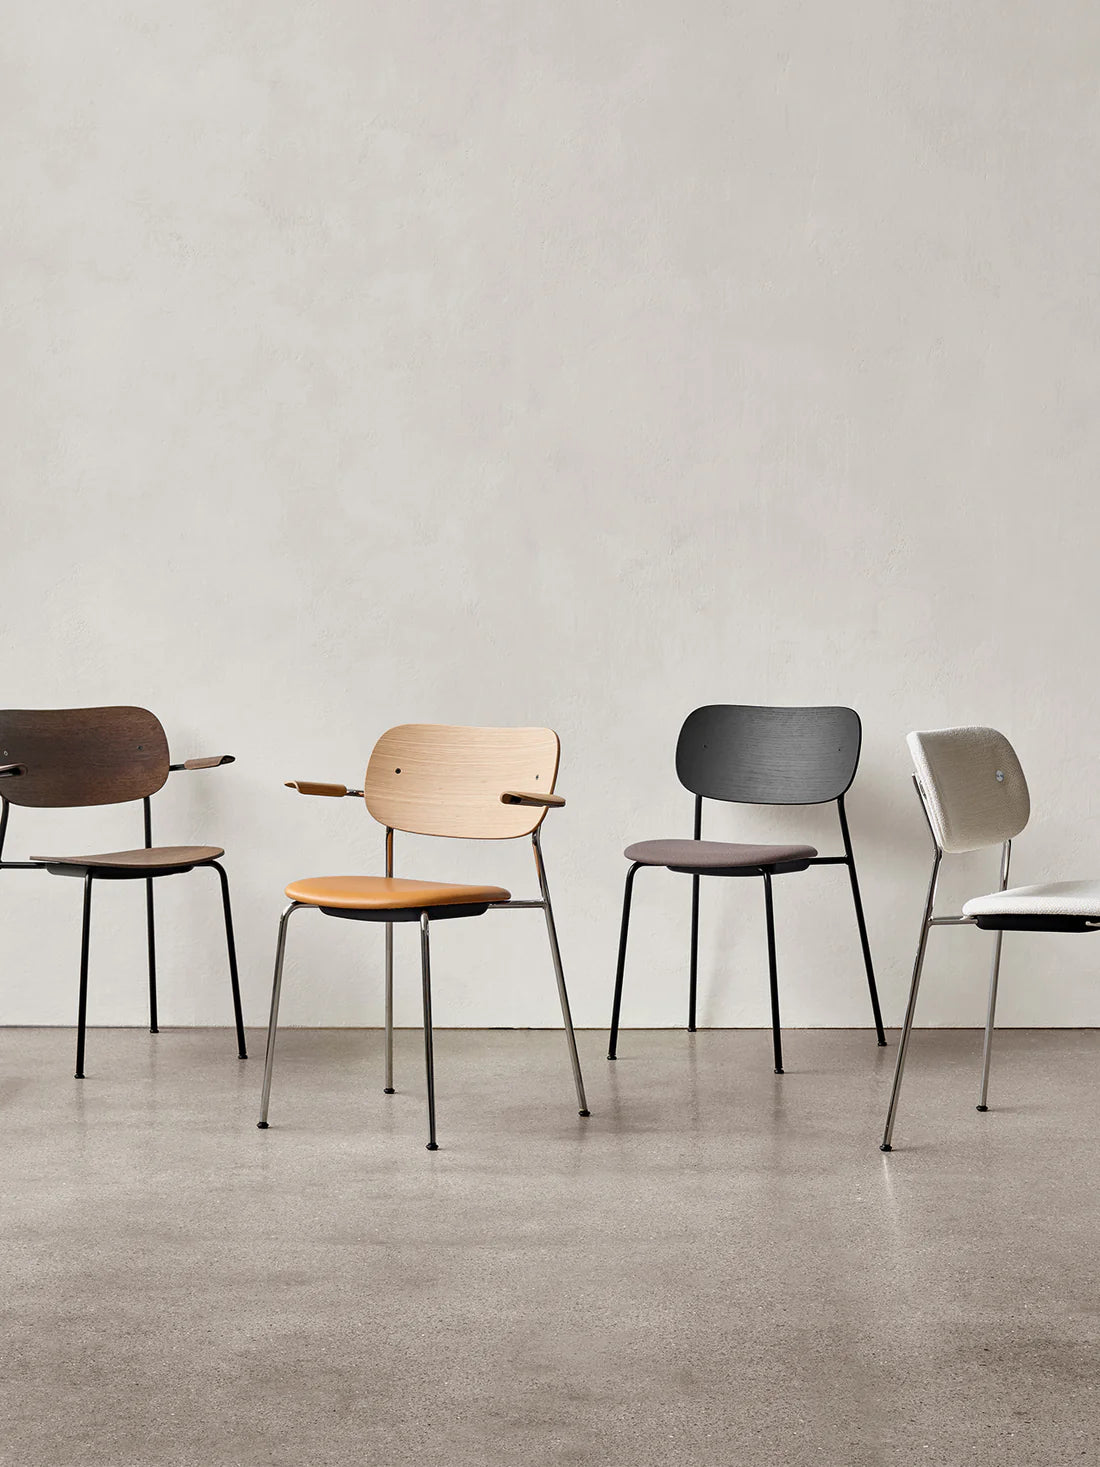 Co Dining Chairs by Audo Copenhagen.